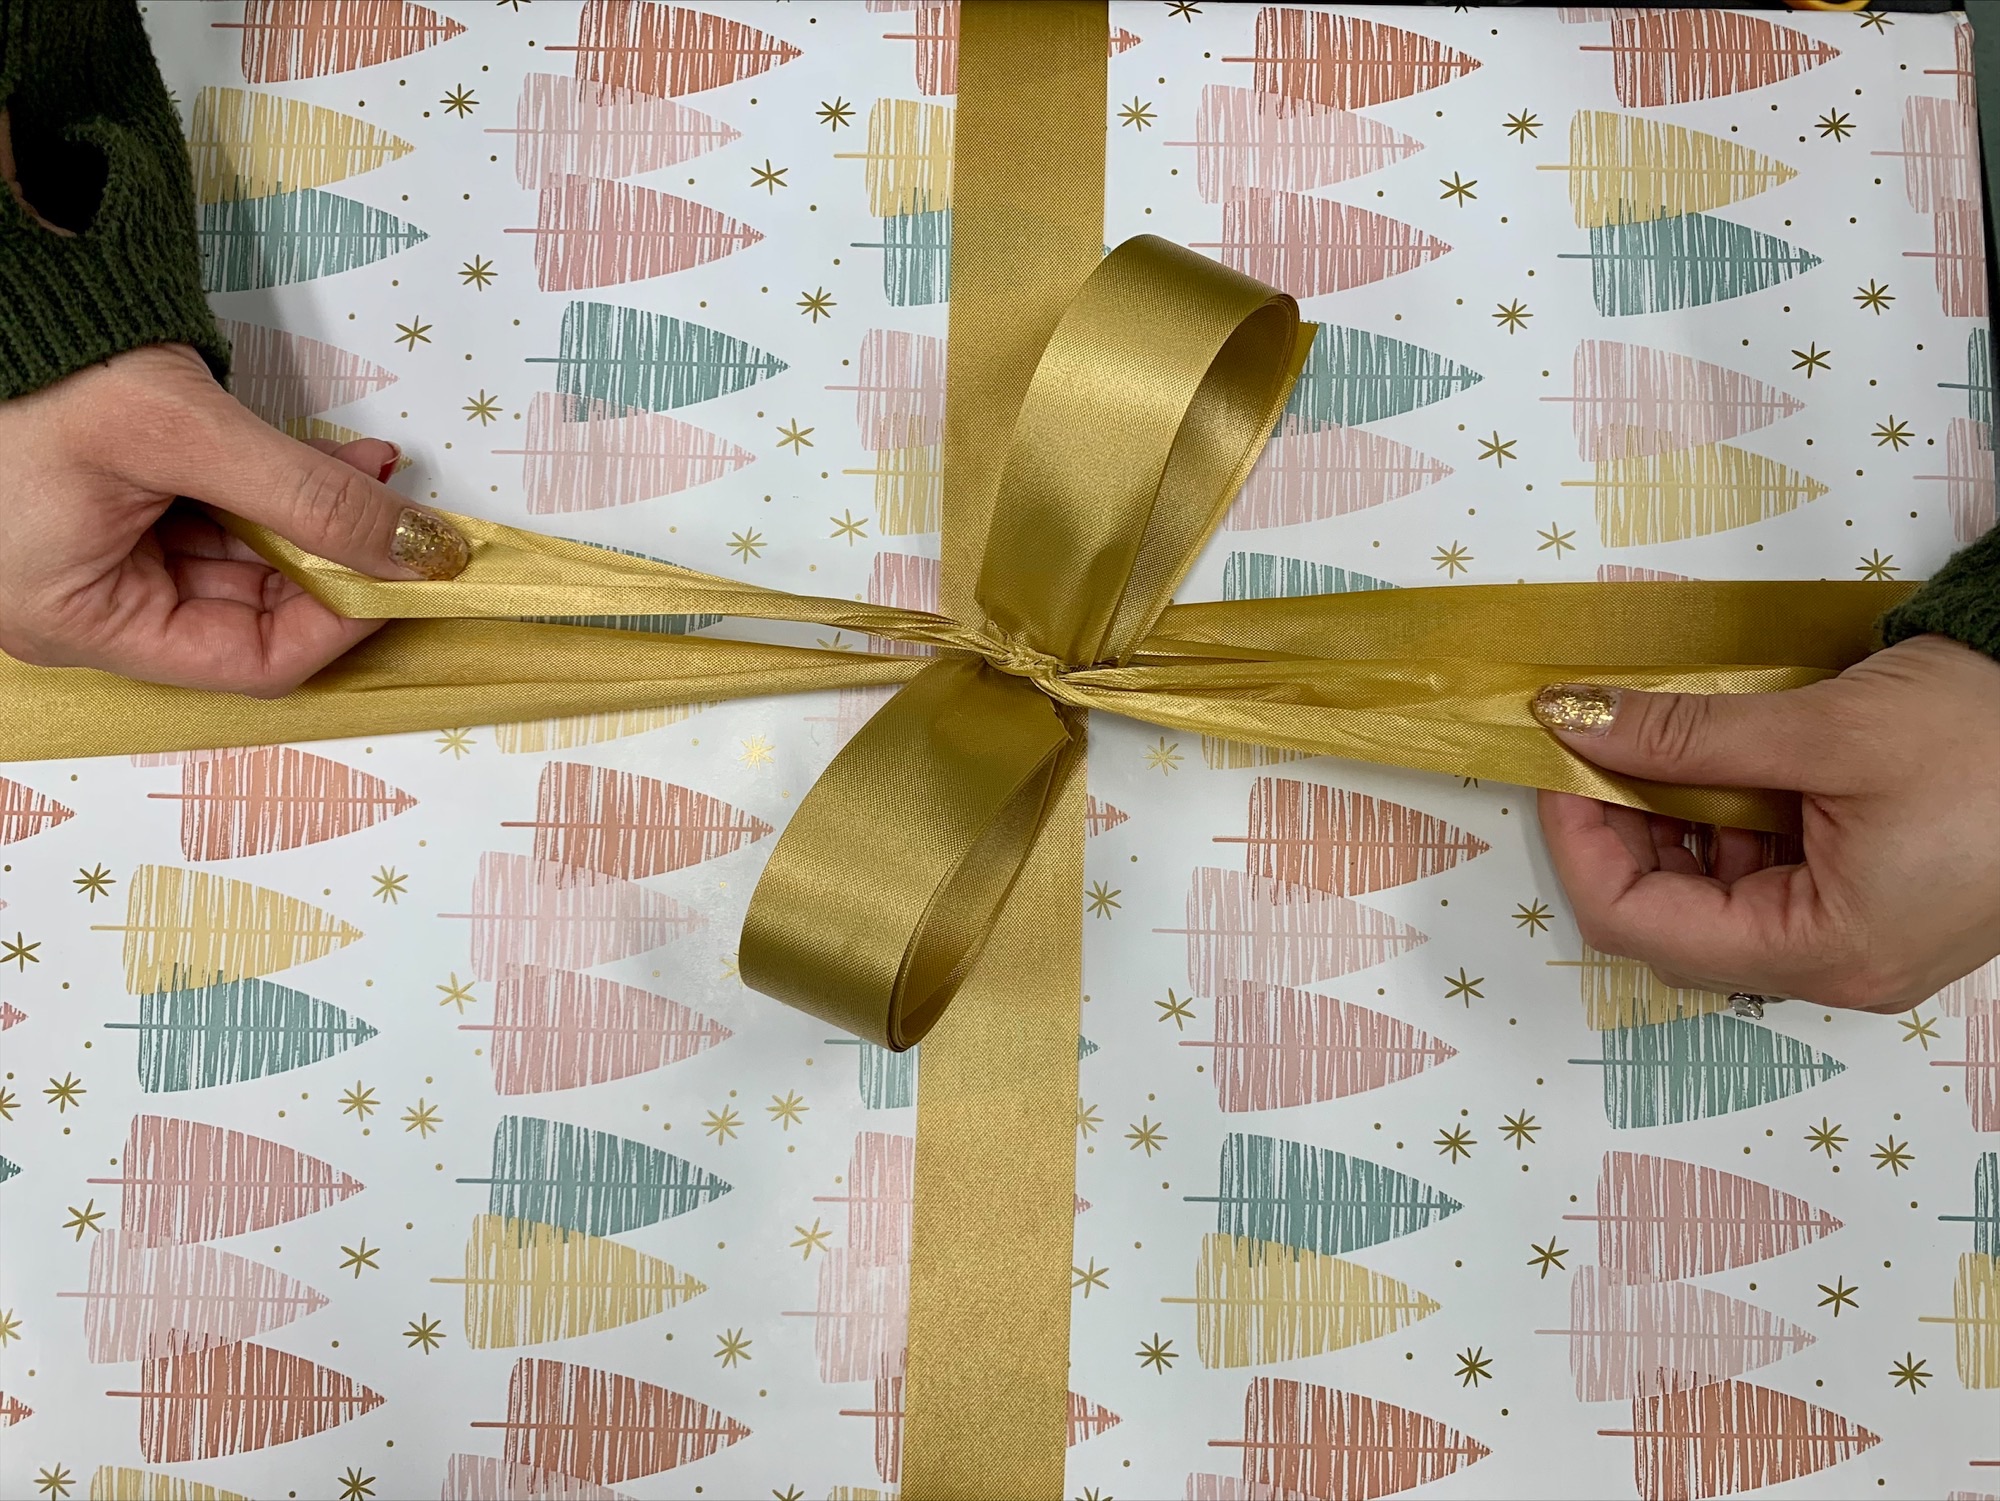 the unfolded gold ribbon loops tied onto the gift box using a double knot